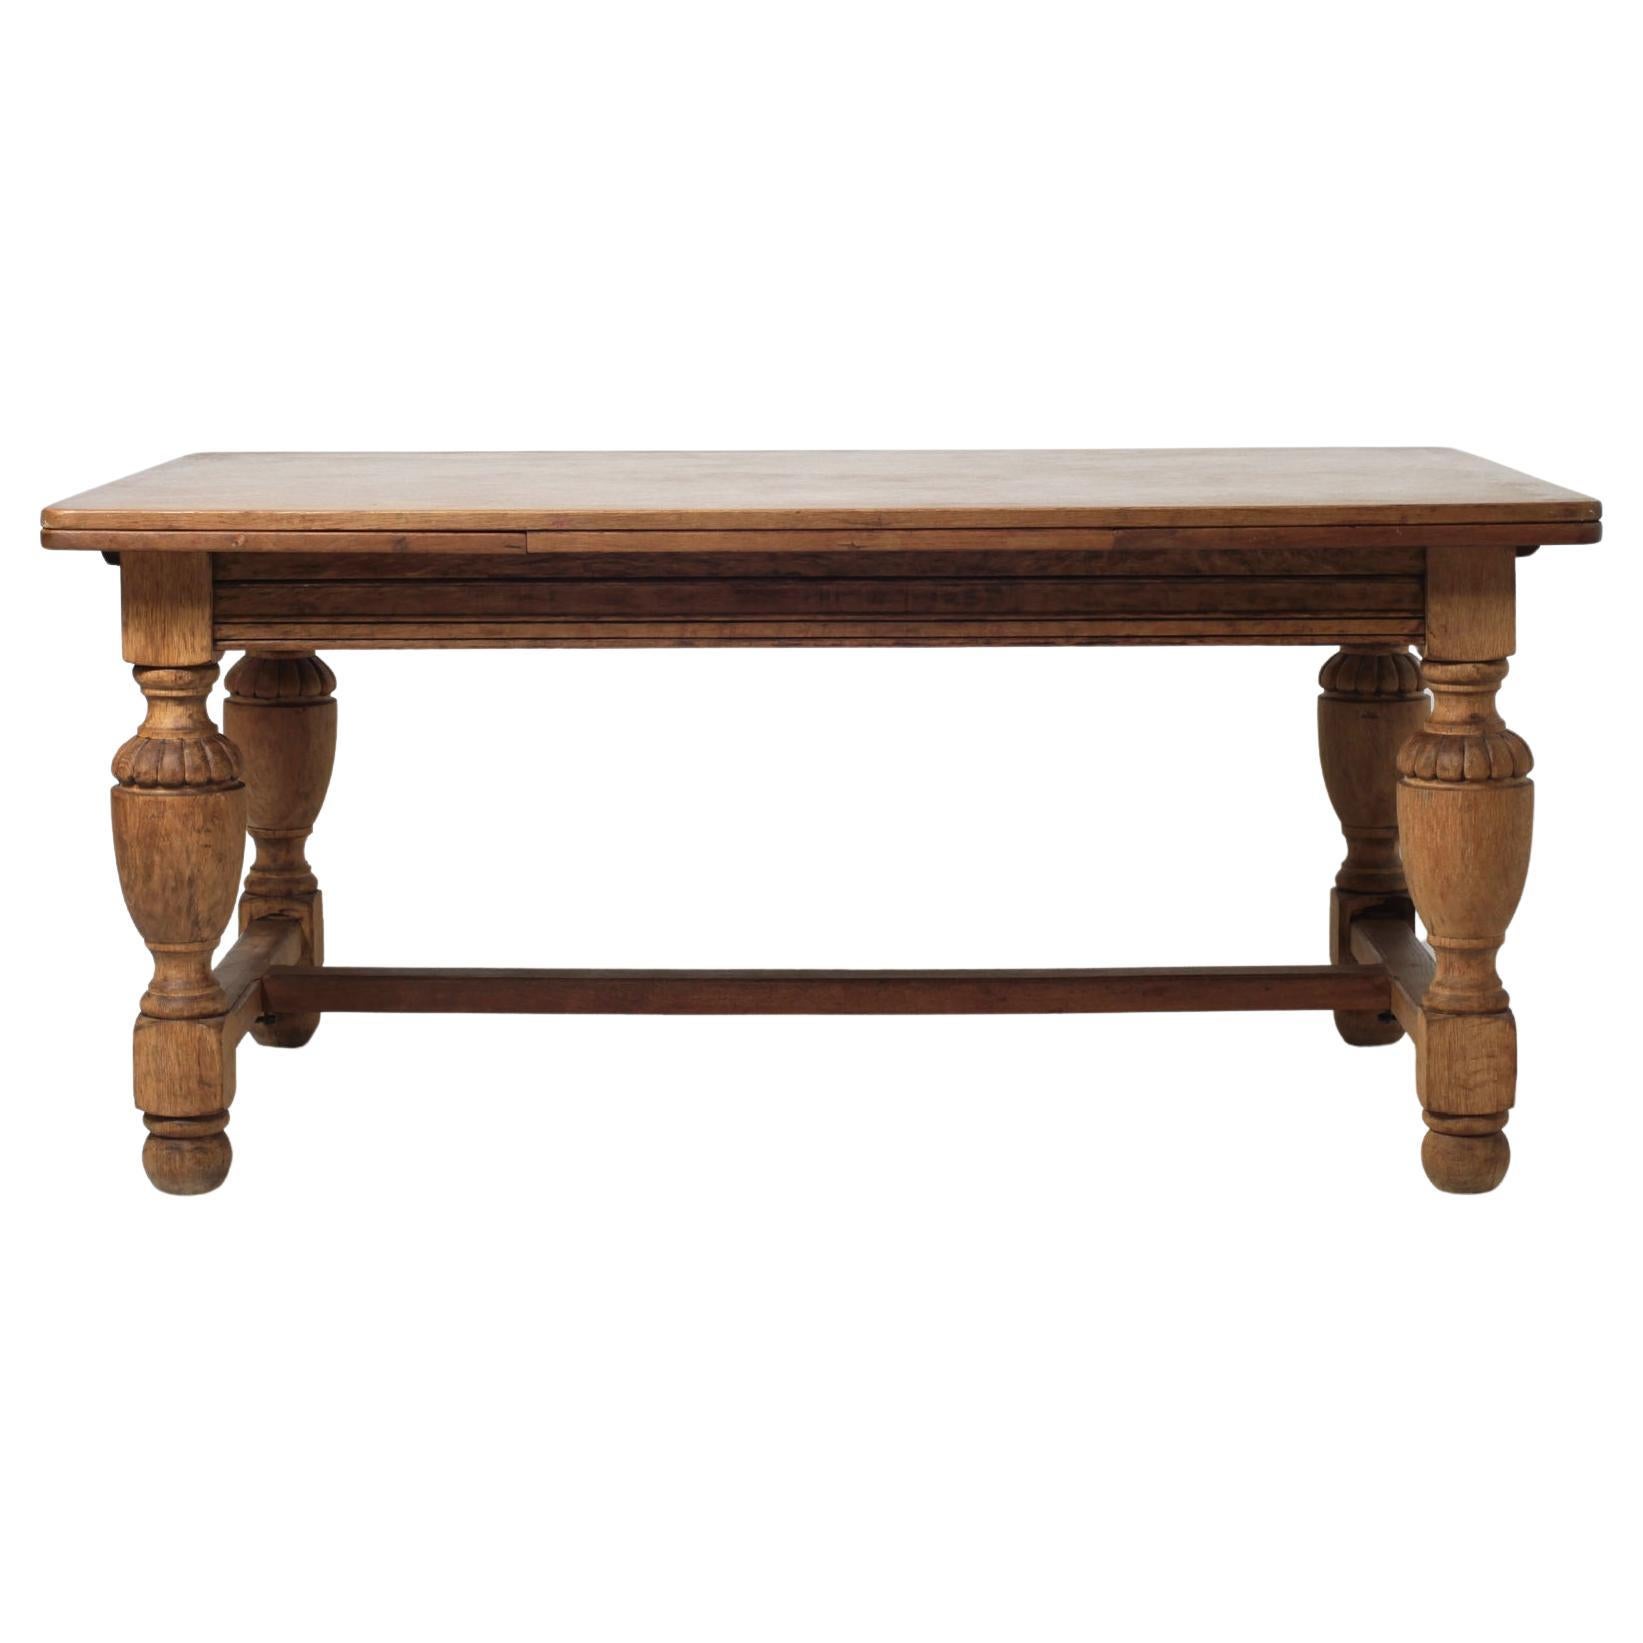 Mid 20th Century Carved and Marquetered Country French Provincial Oak Table For Sale